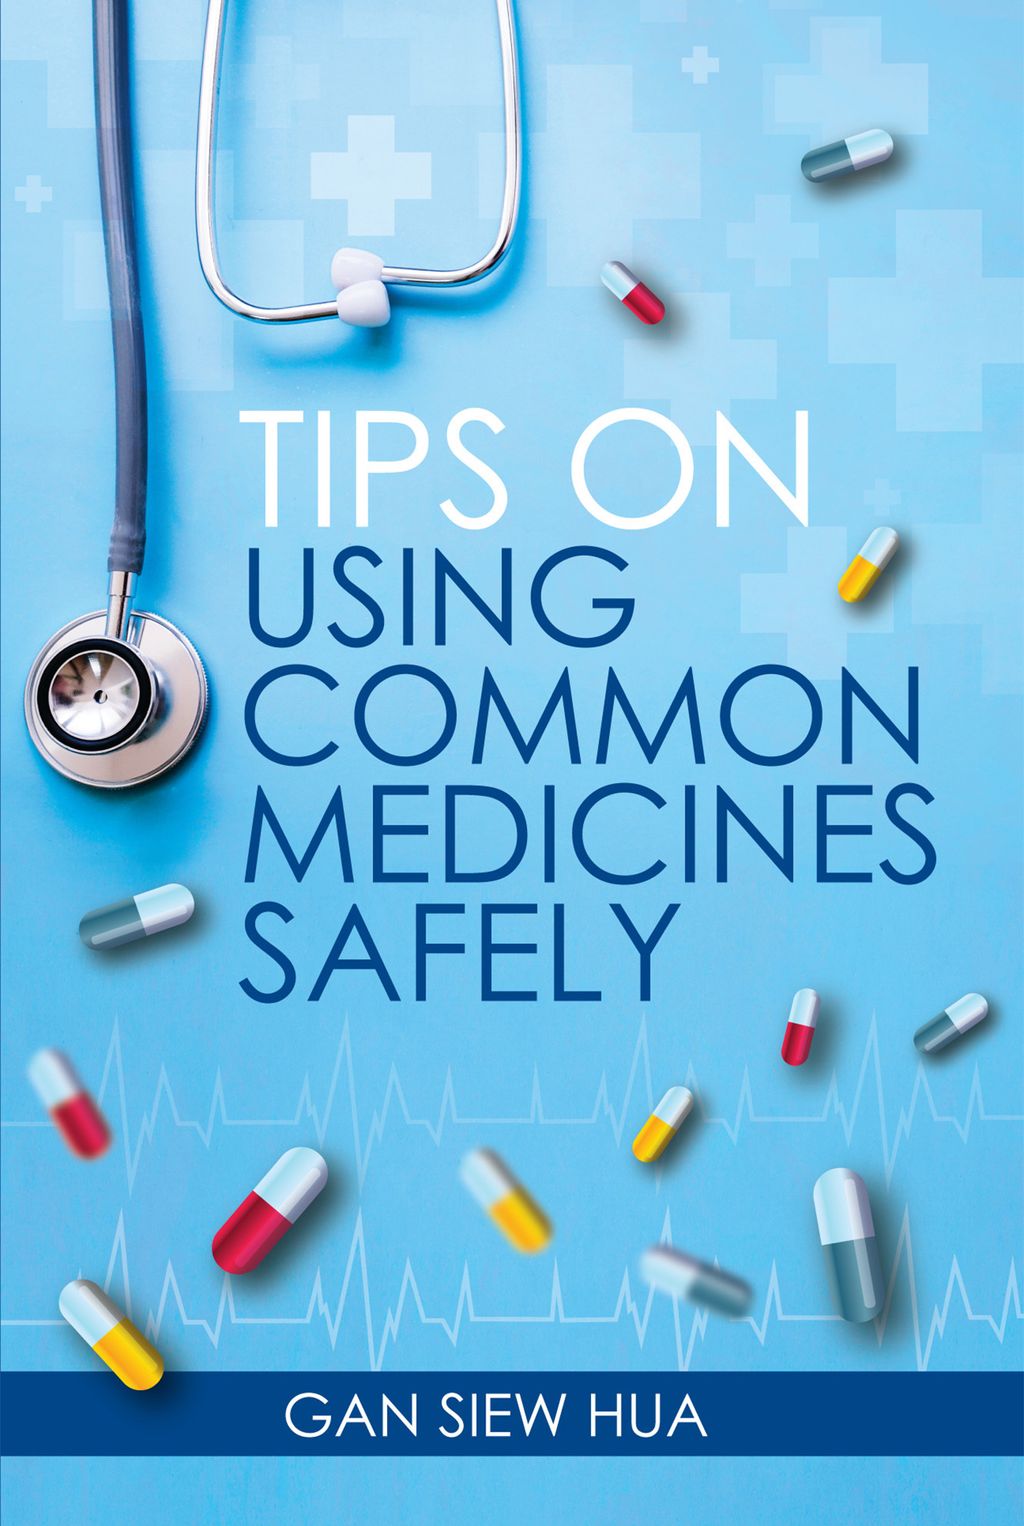 Tips on Using Common Medicines Safely.jpg